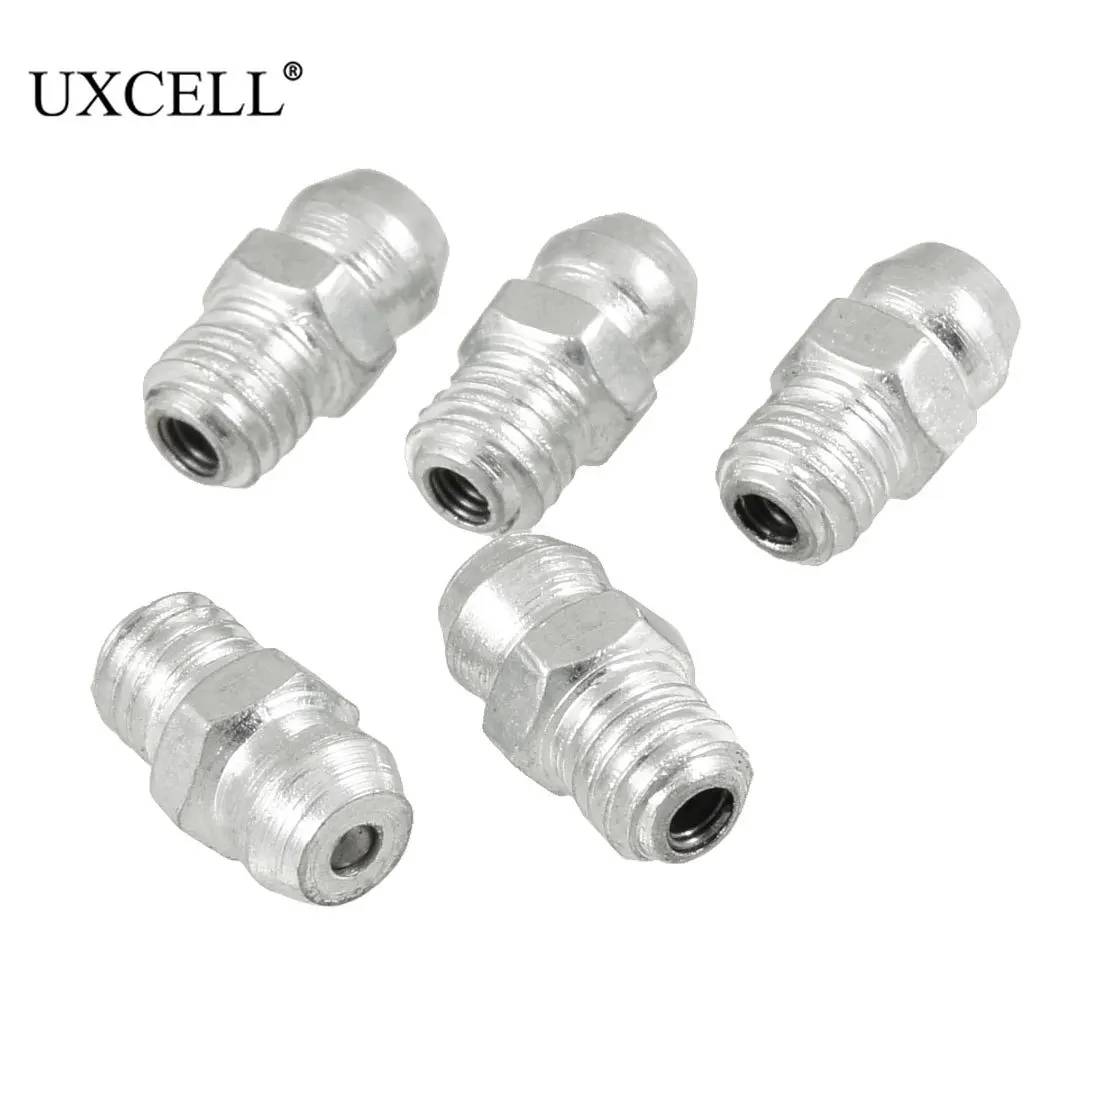 uxcell 2pcs M6 x 1 Stainless Steel Motorcycle Car 90 Degree Grease Nipple Fitting